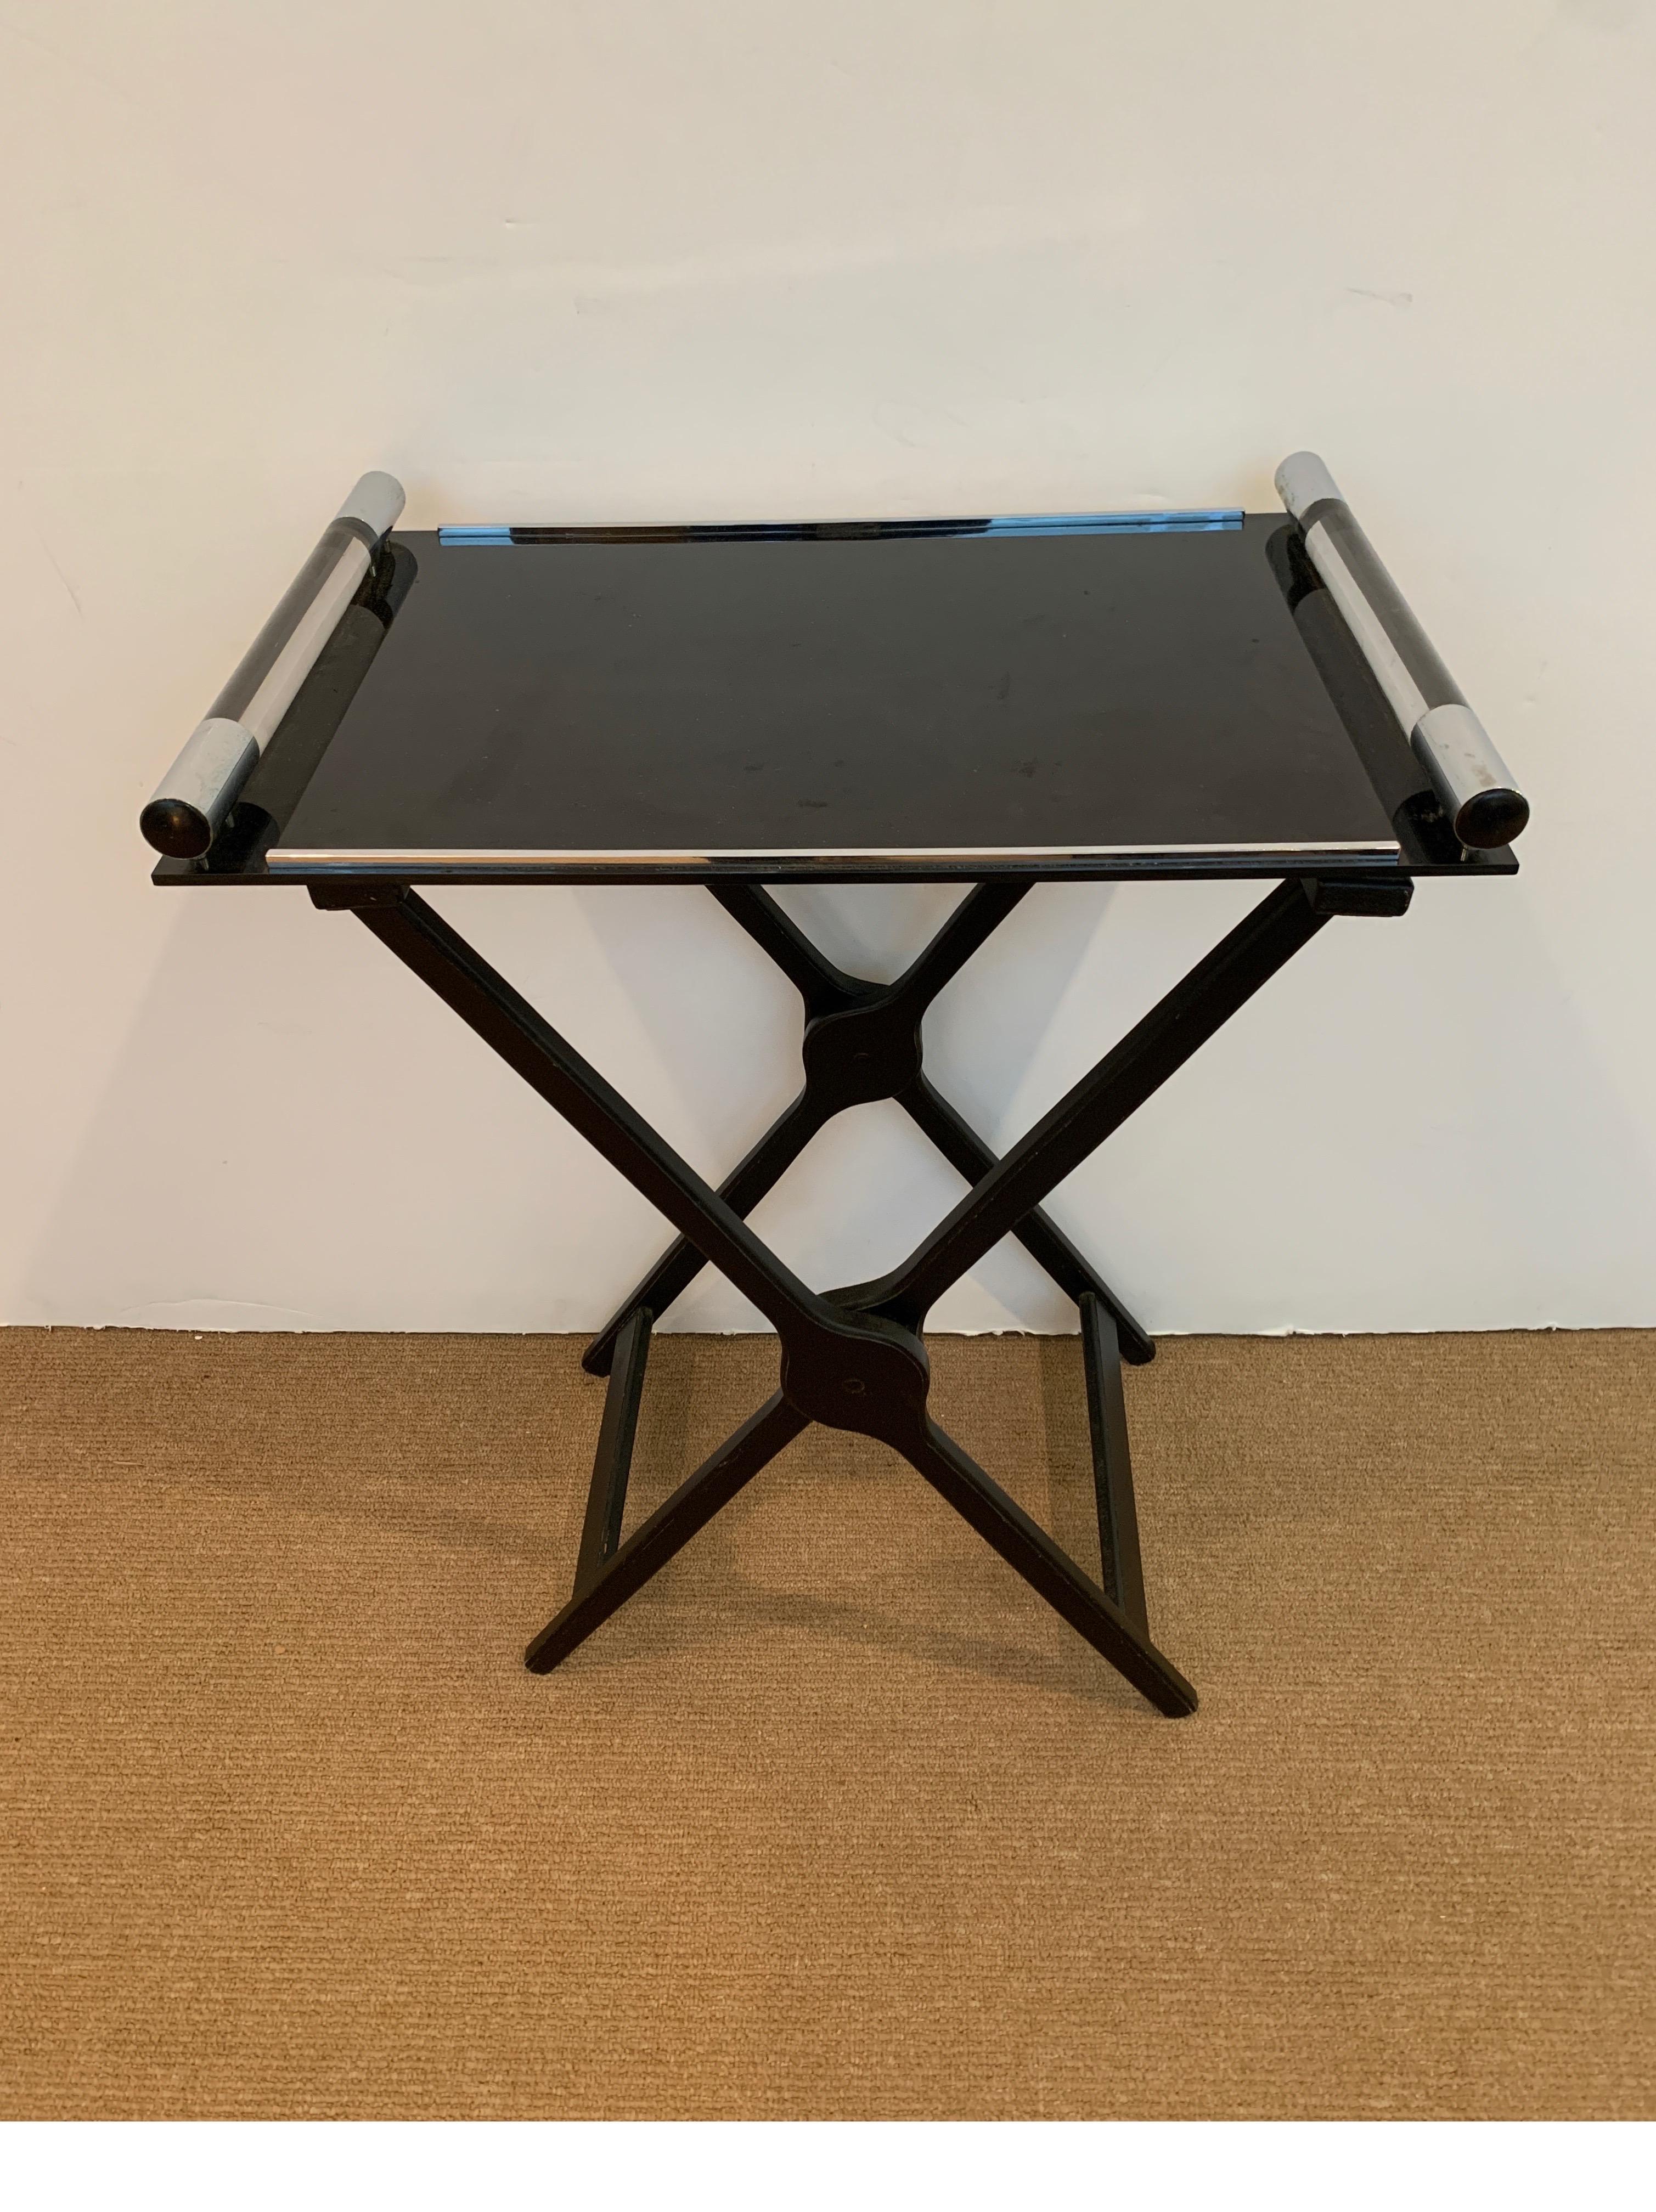 Chic and modern 1970s tray on stand. The ebonized wood X-base with black Lucite tray top with clear Lucite handles.
Dimensions: D16